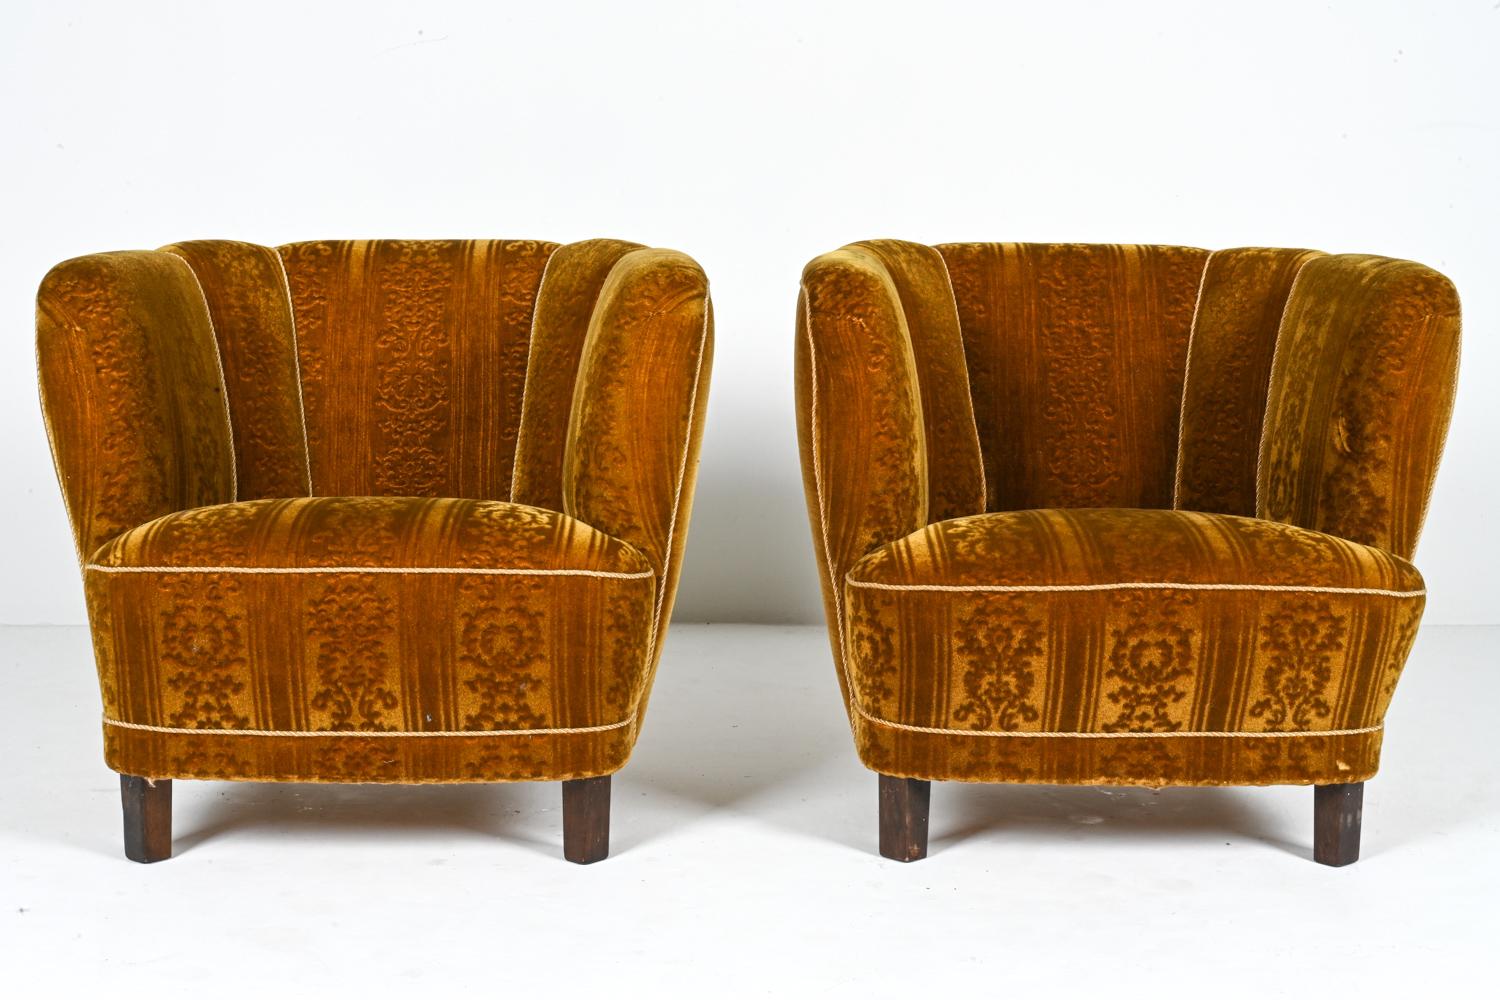 Scandinavian Modern Pair of Manner of Viggo Boesen Lounge Chairs by Slagelse, c. 1940's For Sale